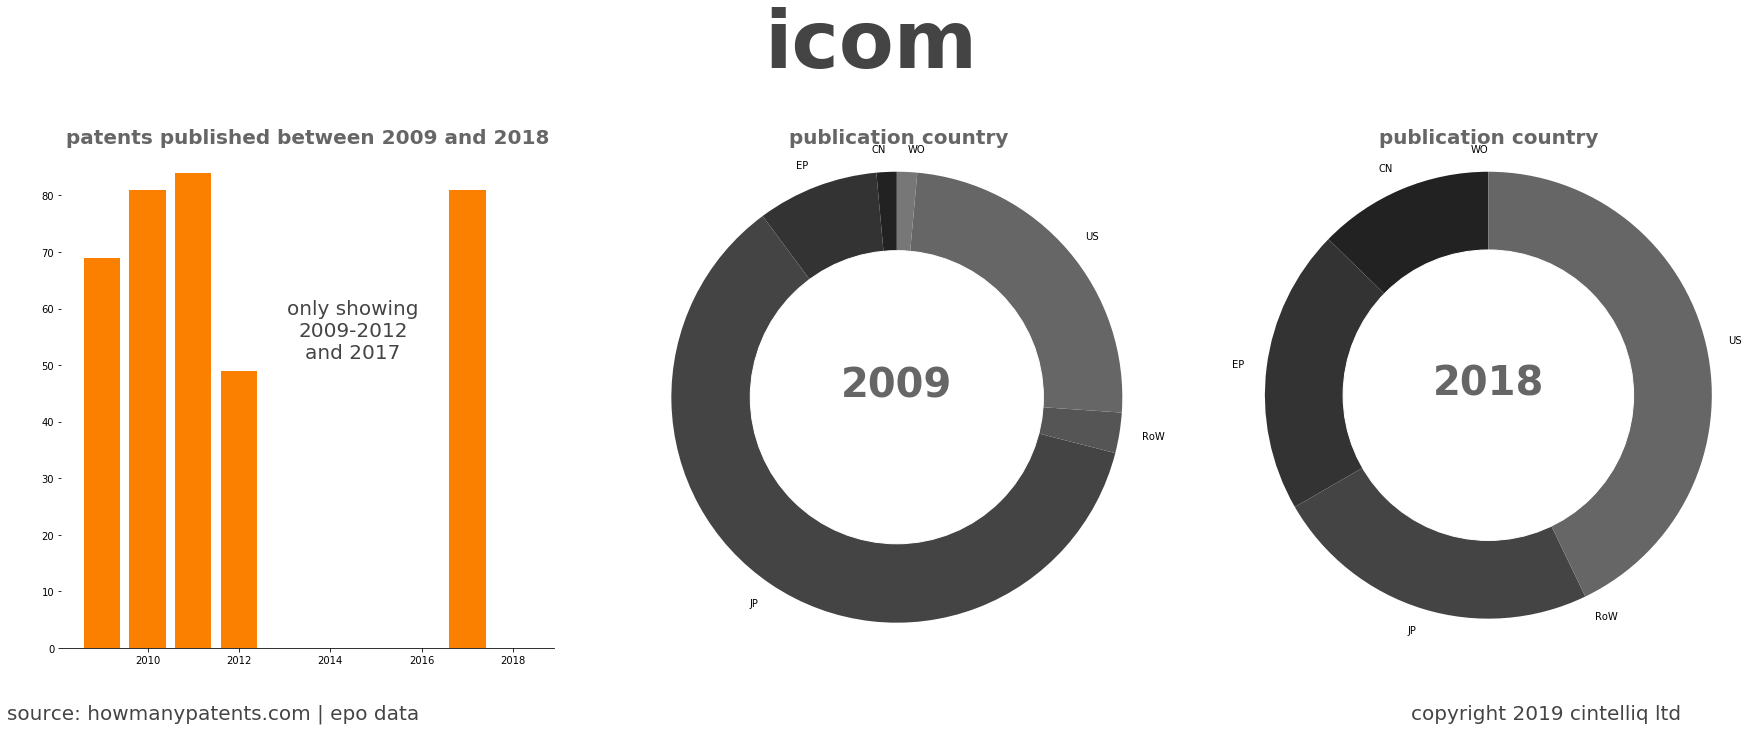 summary of patents for Icom